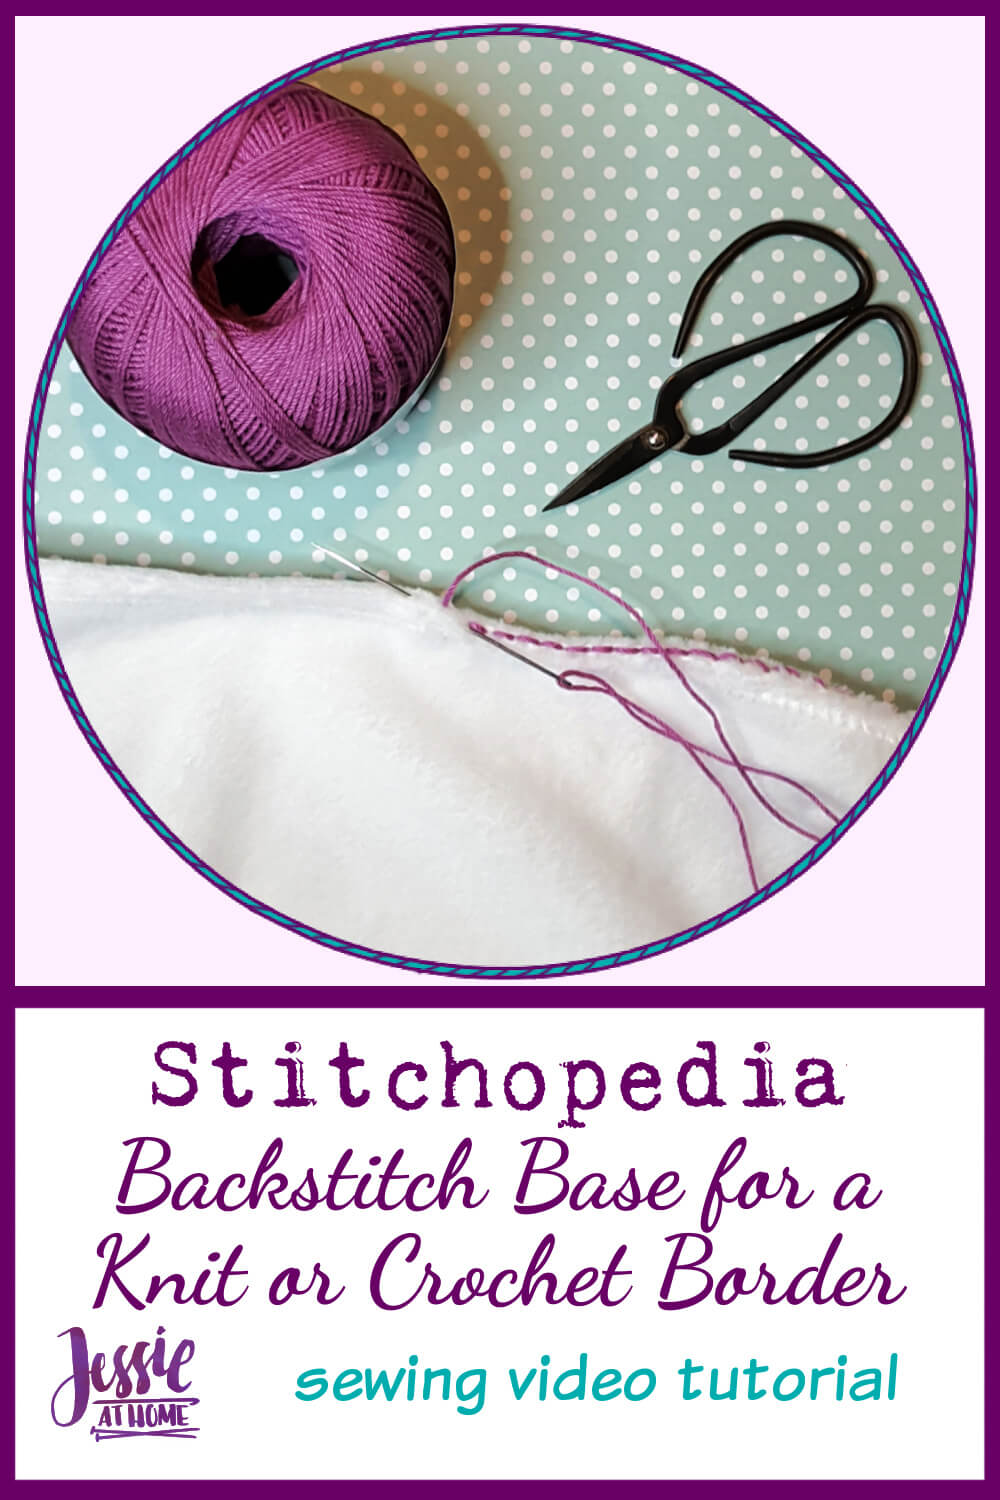 Backstitch Base for a Knit or Crochet Border on Fabric